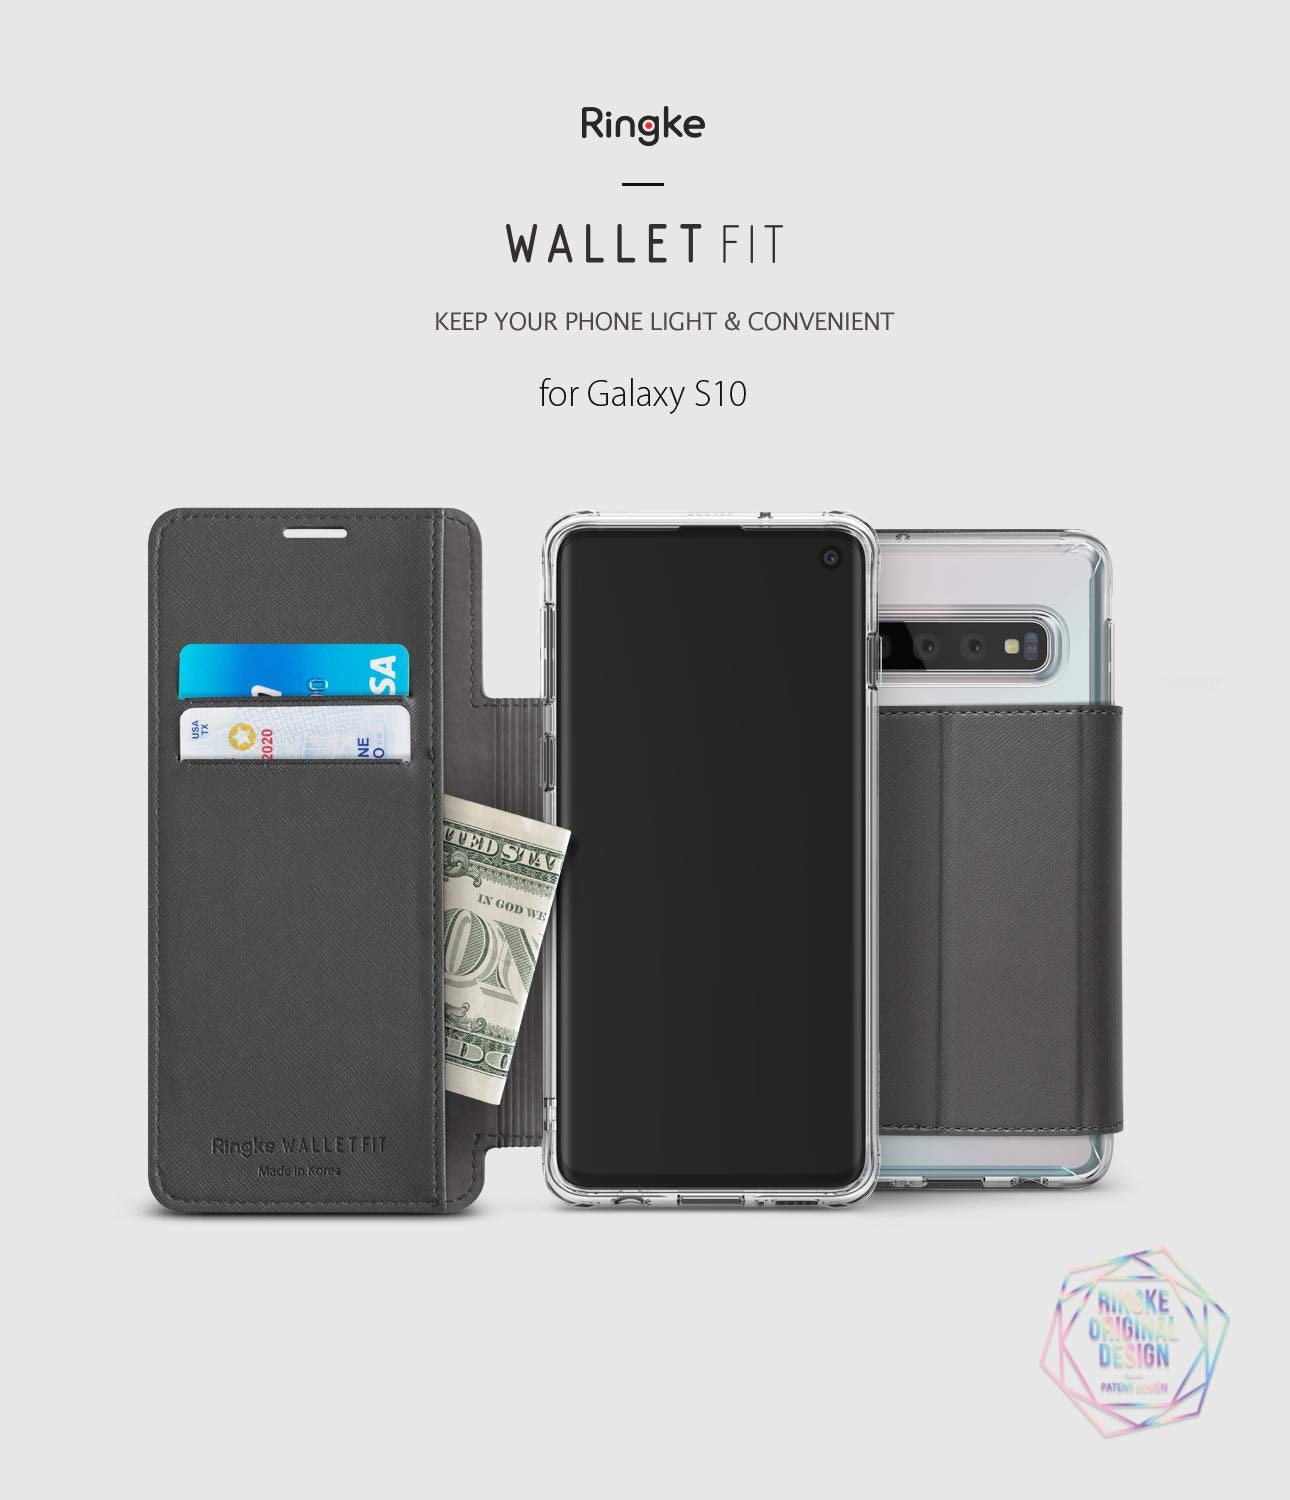 ringke wallet fit for galaxy s10